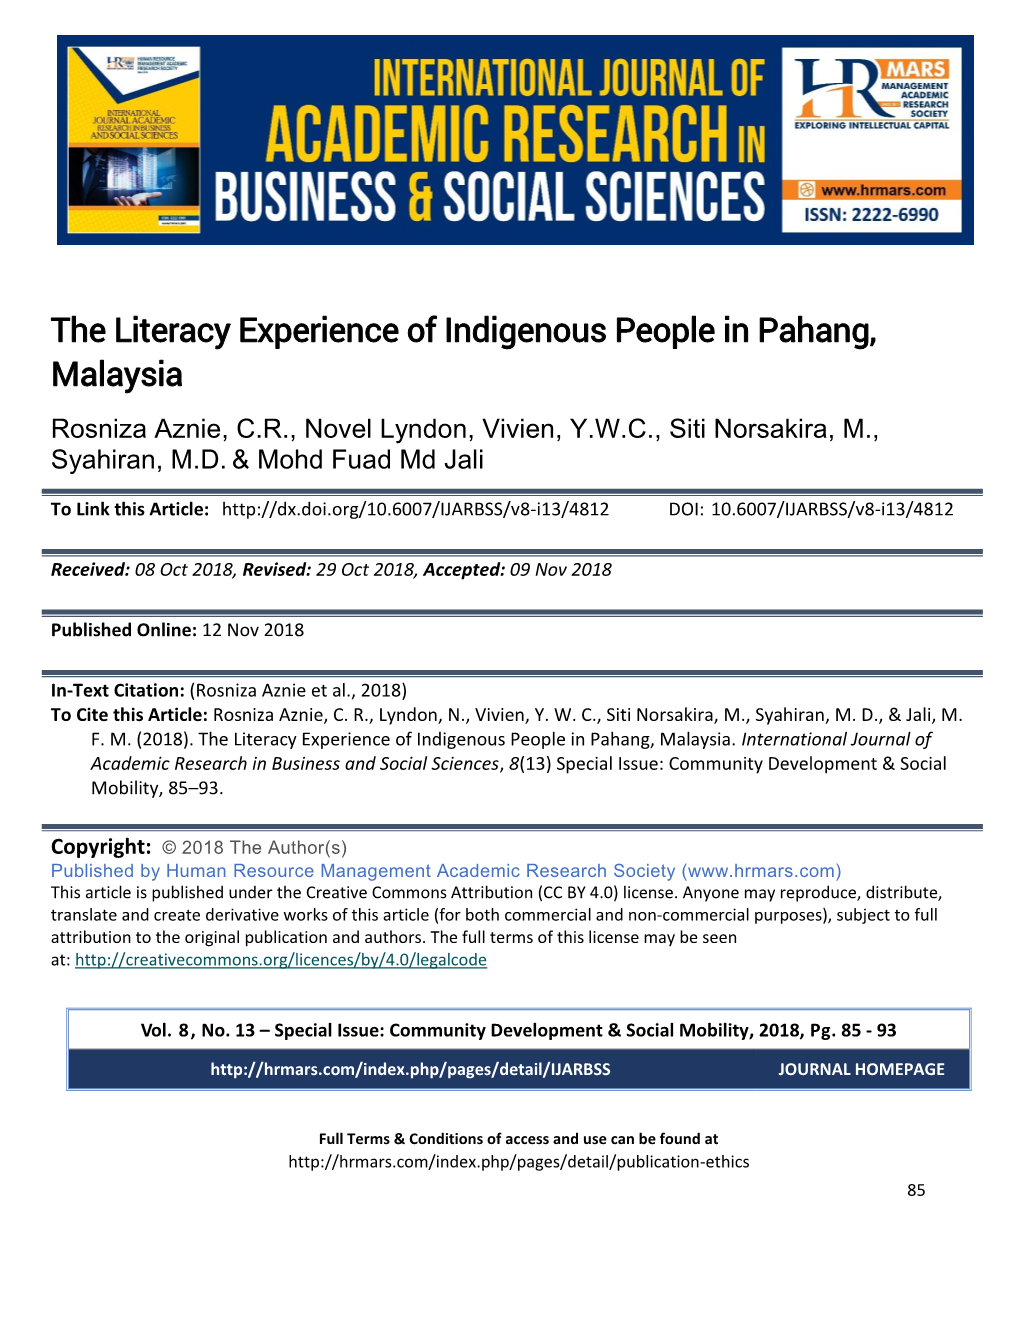 The Literacy Experience of Indigenous People in Pahang, Malaysia